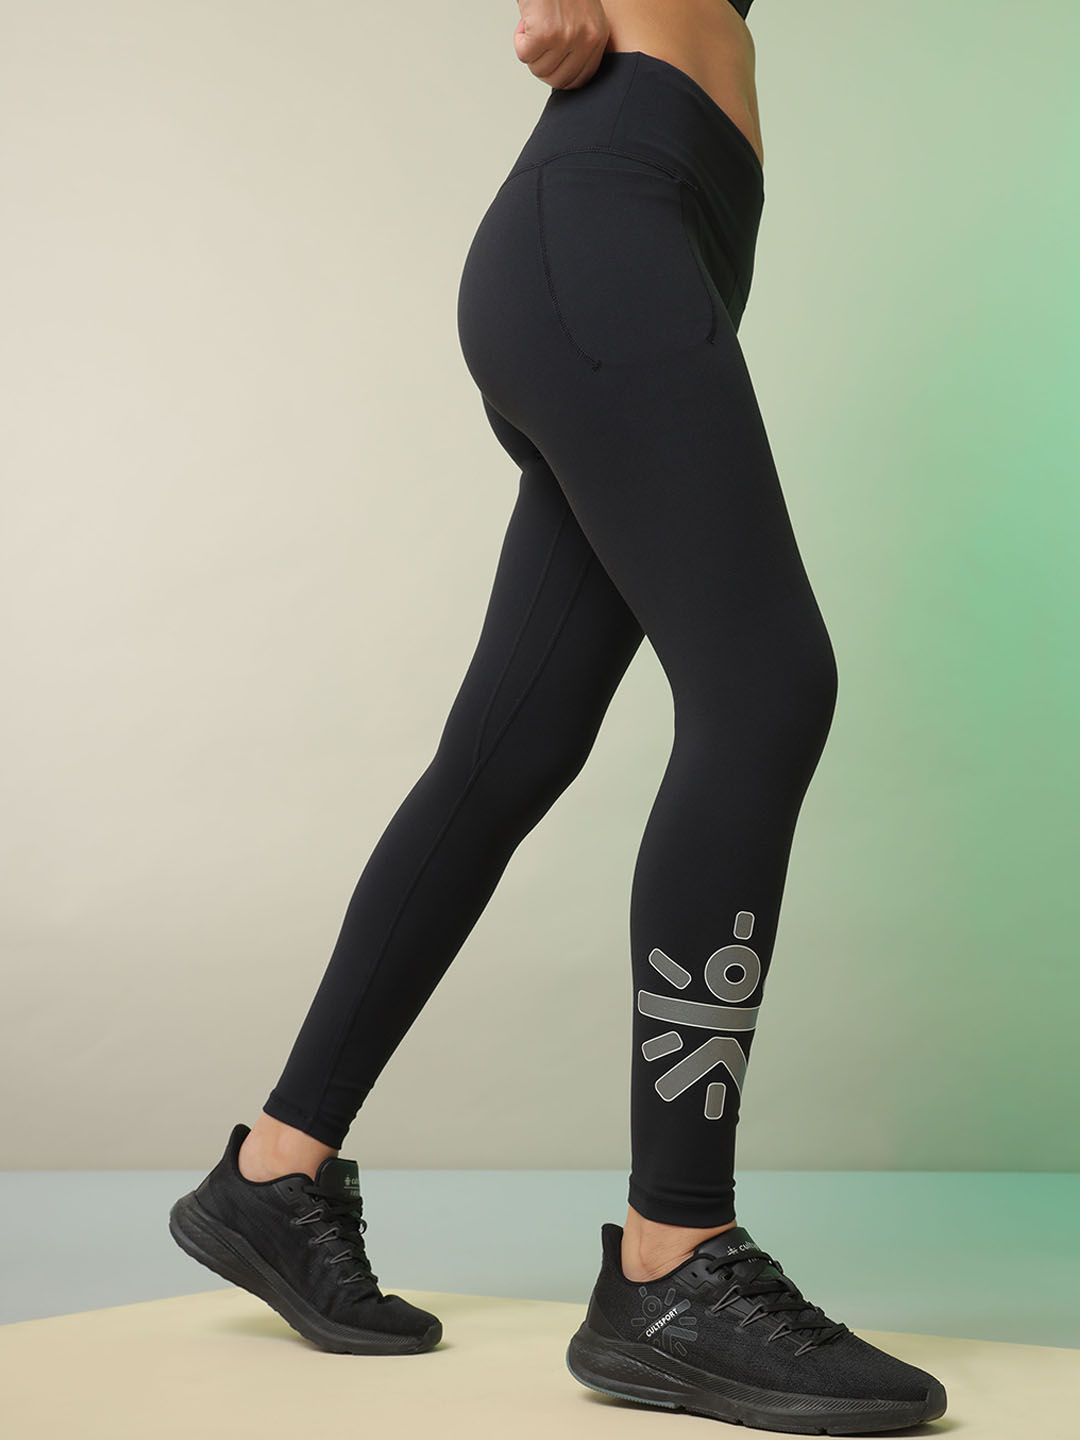 Cultsport Women Black Solid Training or Gym Tights Price in India